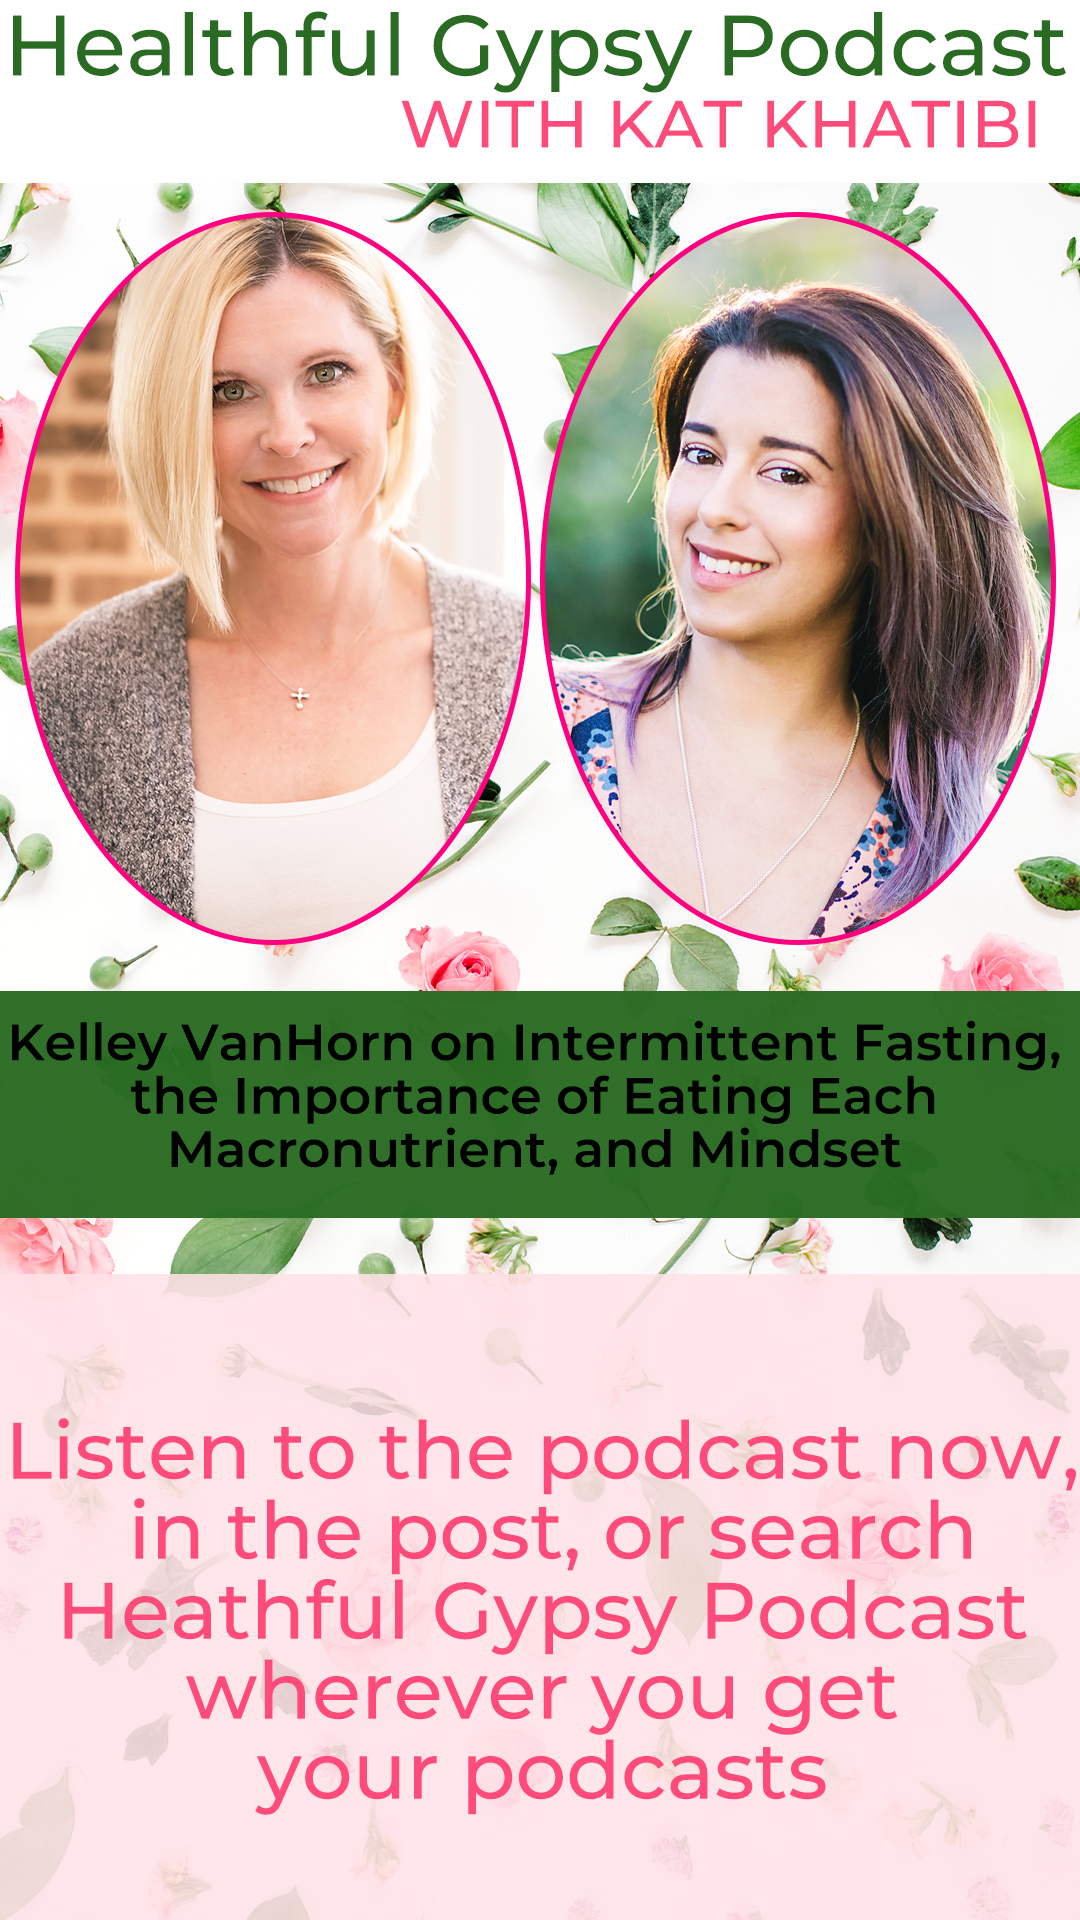 Kelley VanHorn on Intermittent Fasting the Importance of Eating Each Macronutrient, and Mindset